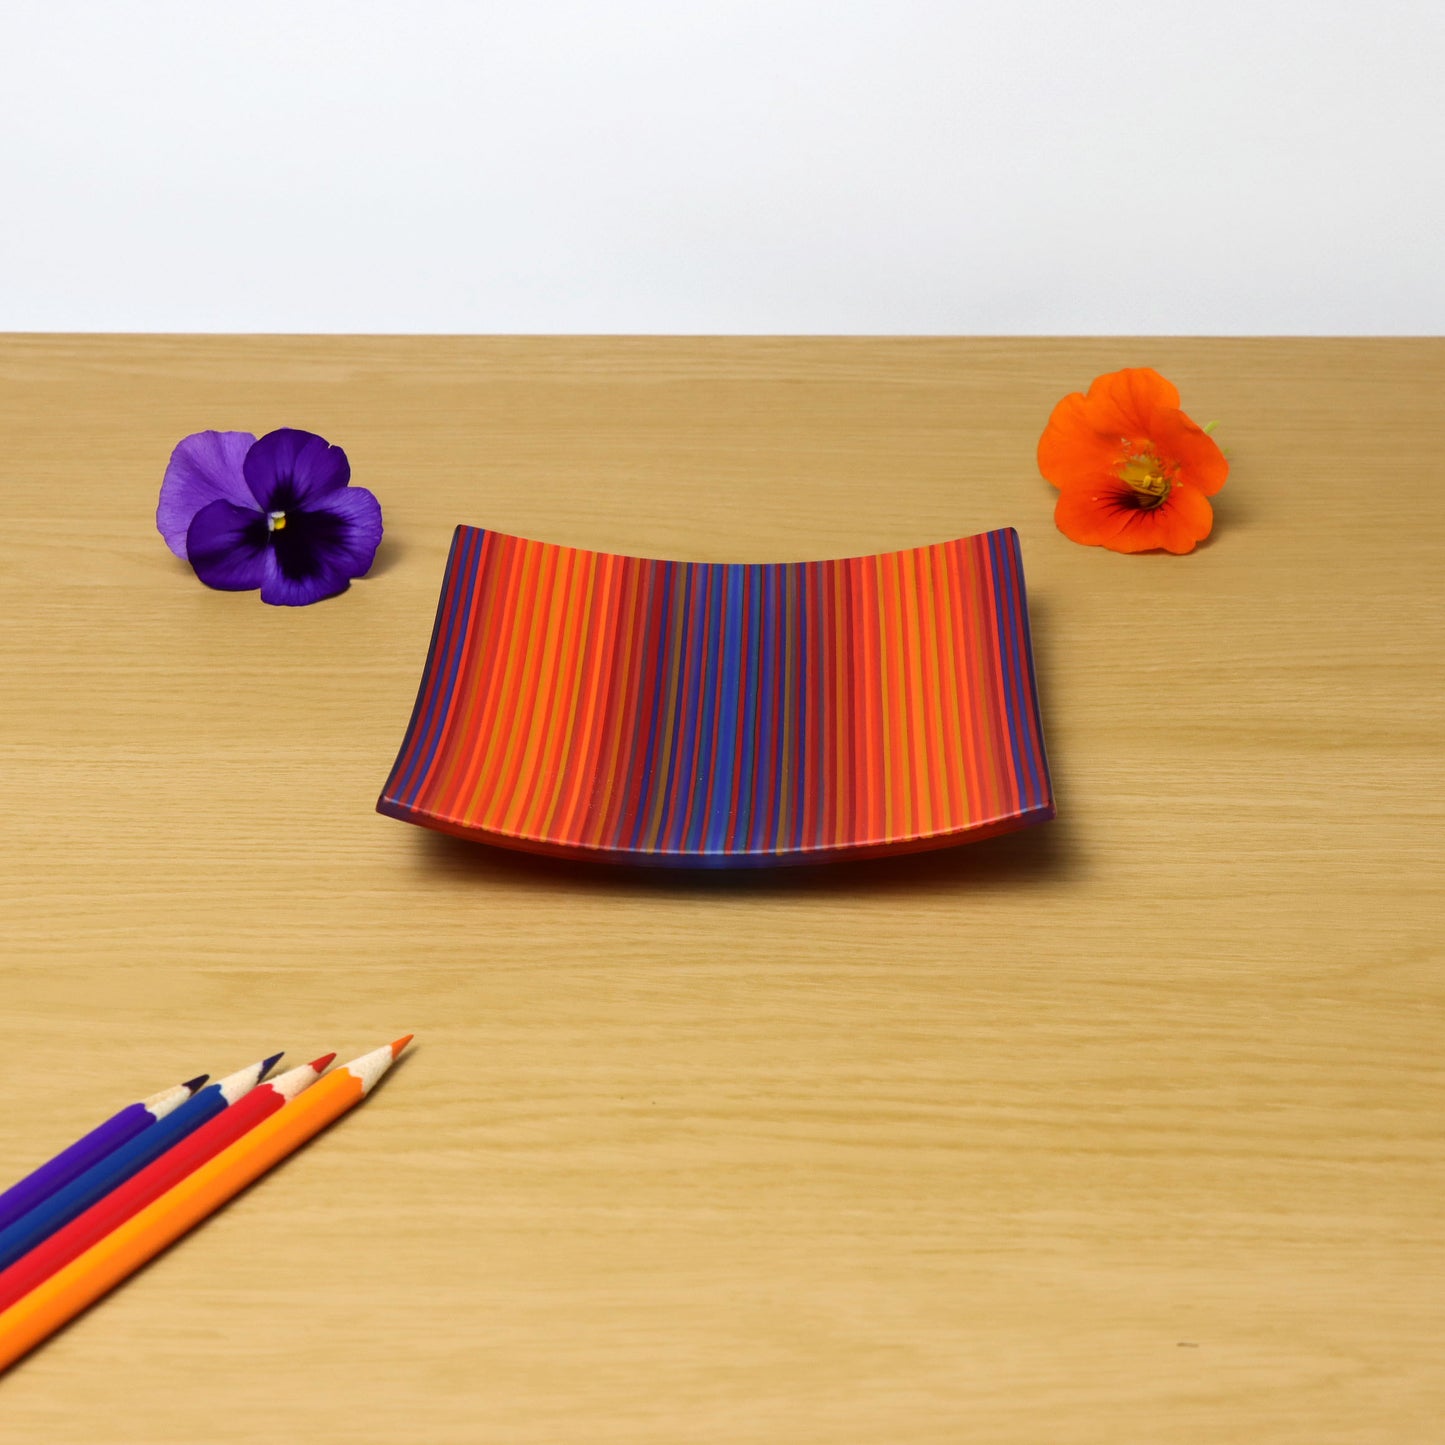 A captivating ColourWave fused glass plate, square in shape, showcasing vibrant stripes in shades of red, orange, purple, and blue. The plate is situated on a wooden surface, offering a warm contrast. To the right of the plate, two flowers—one purple, one orange—add a natural touch to the setting. In the bottom left corner, a set of coloured pencils with their tips pointing towards the plate, echoing the plate’s vivid colour scheme.